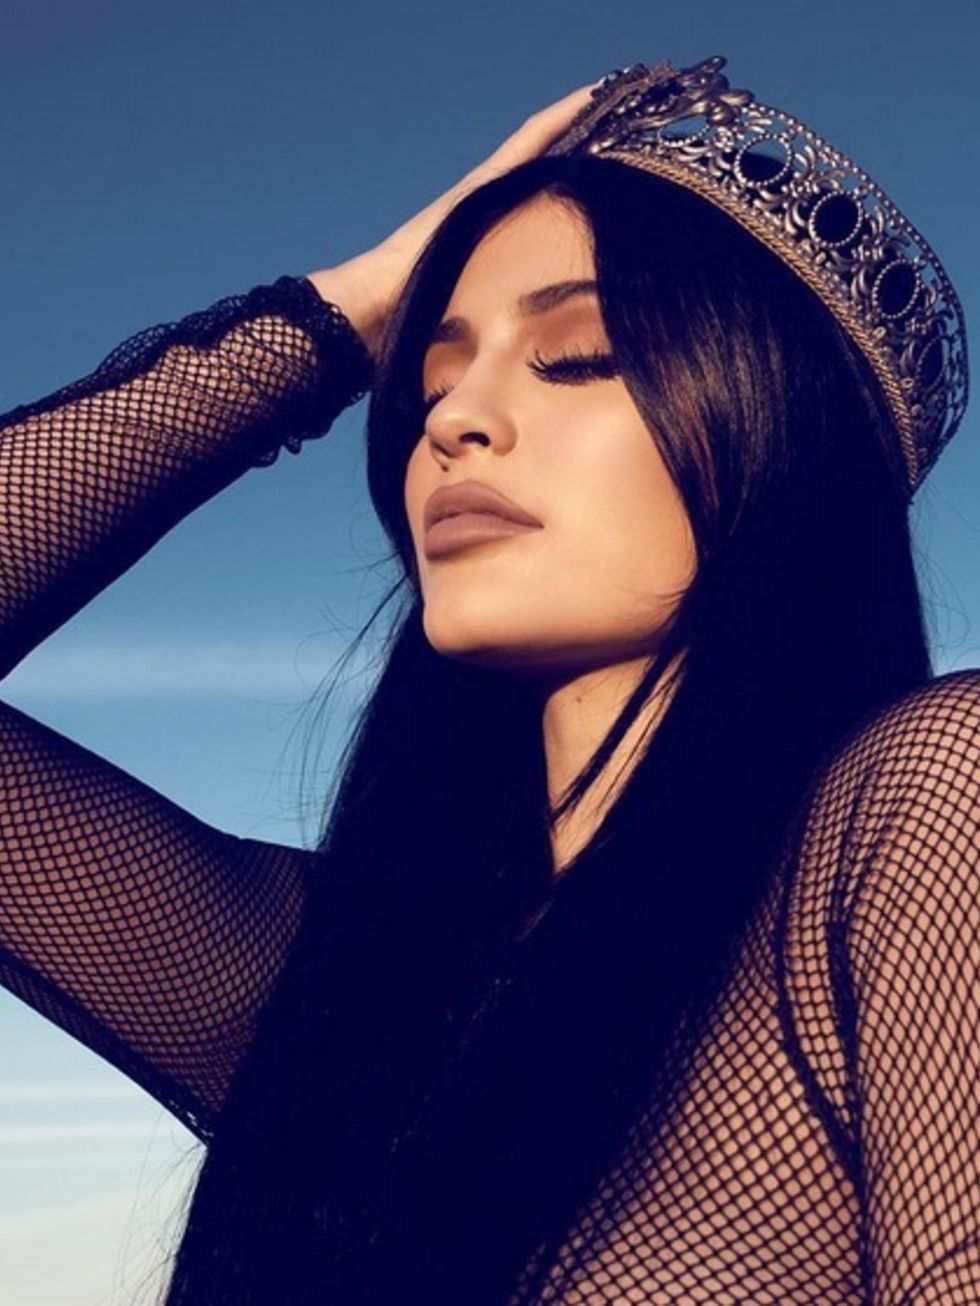 She may not have the most popular Instagram pic of 2015 like her sister Kendall, or as many followers and Kim, but in light of a 69% increase in her popularity, Kylie Jenner is certainly catching up. She now has 44.6m followers.